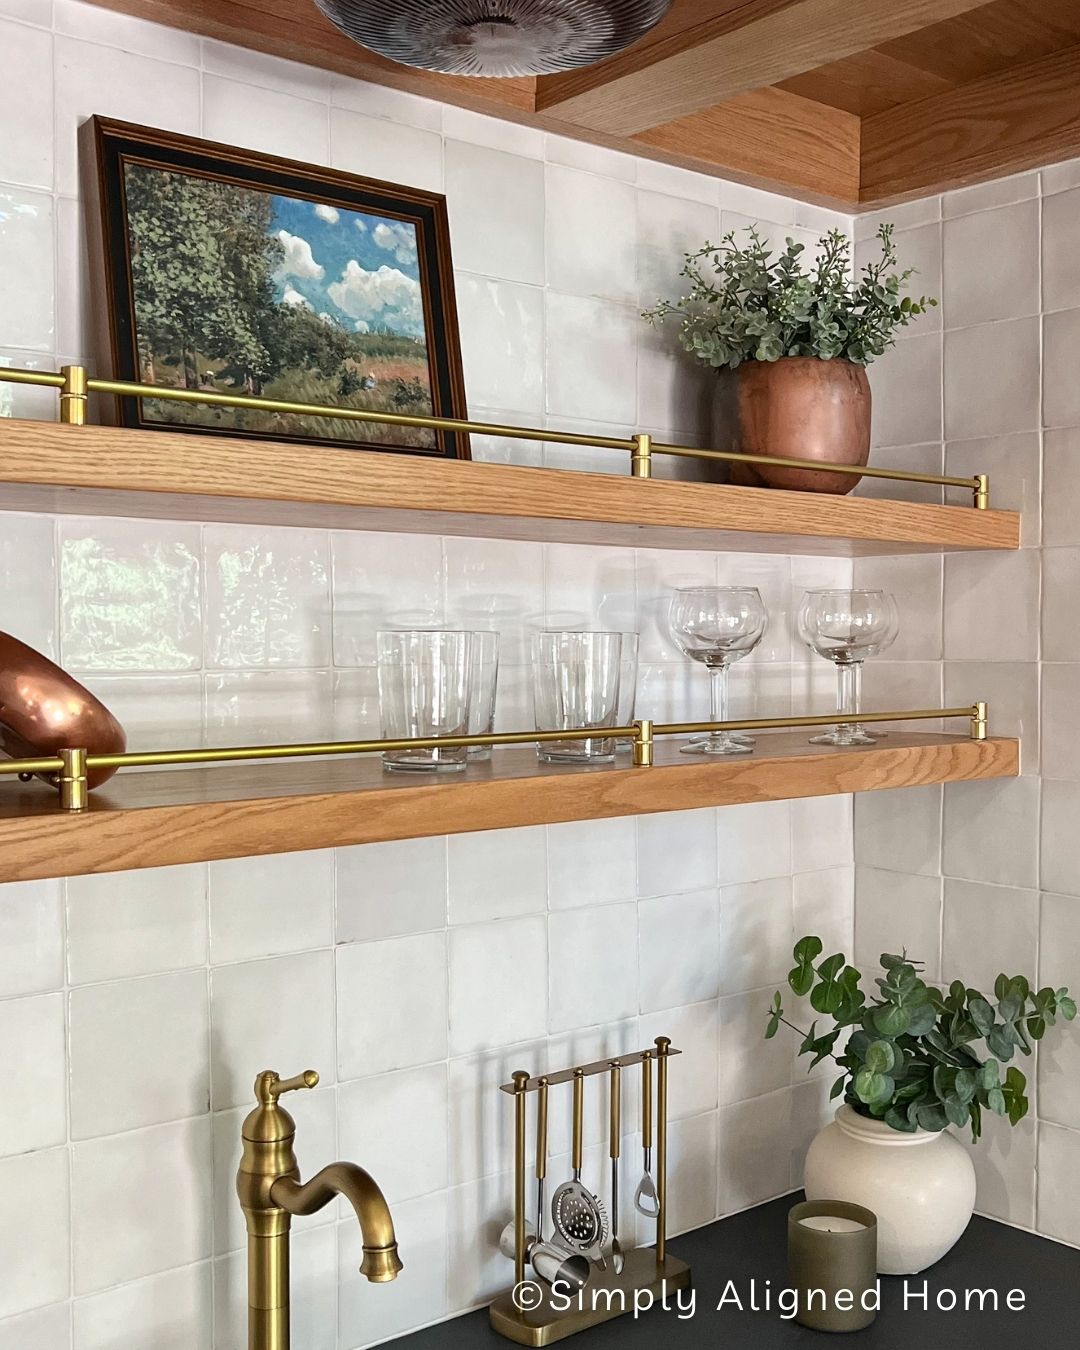 DIY: How to Build Shelves with Brass Gallery Rails